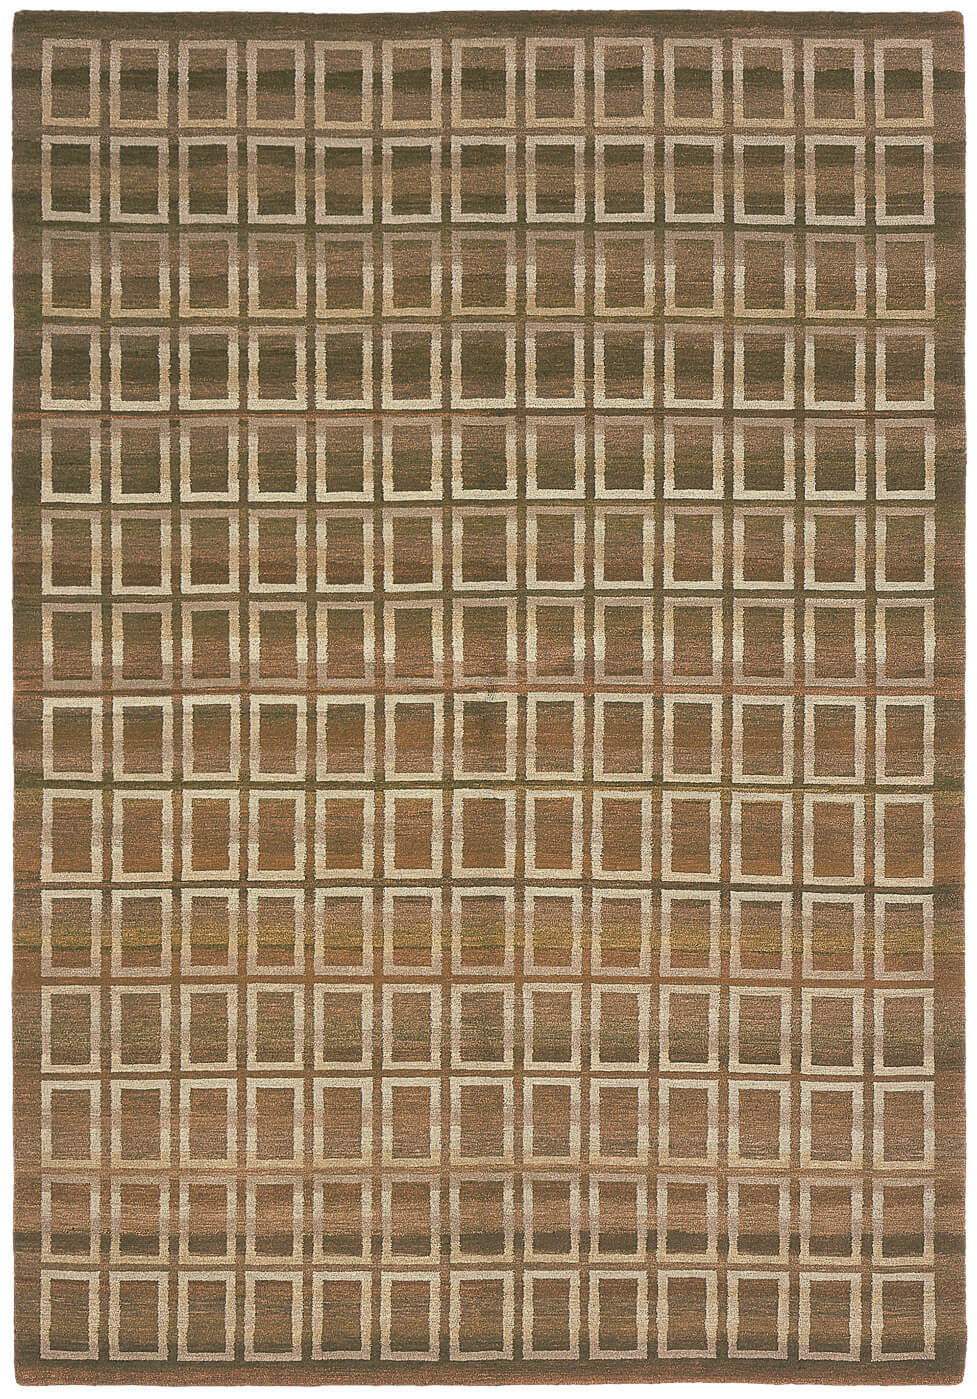 Hand-woven Brown Luxury Rug ☞ Size: 300 x 400 cm